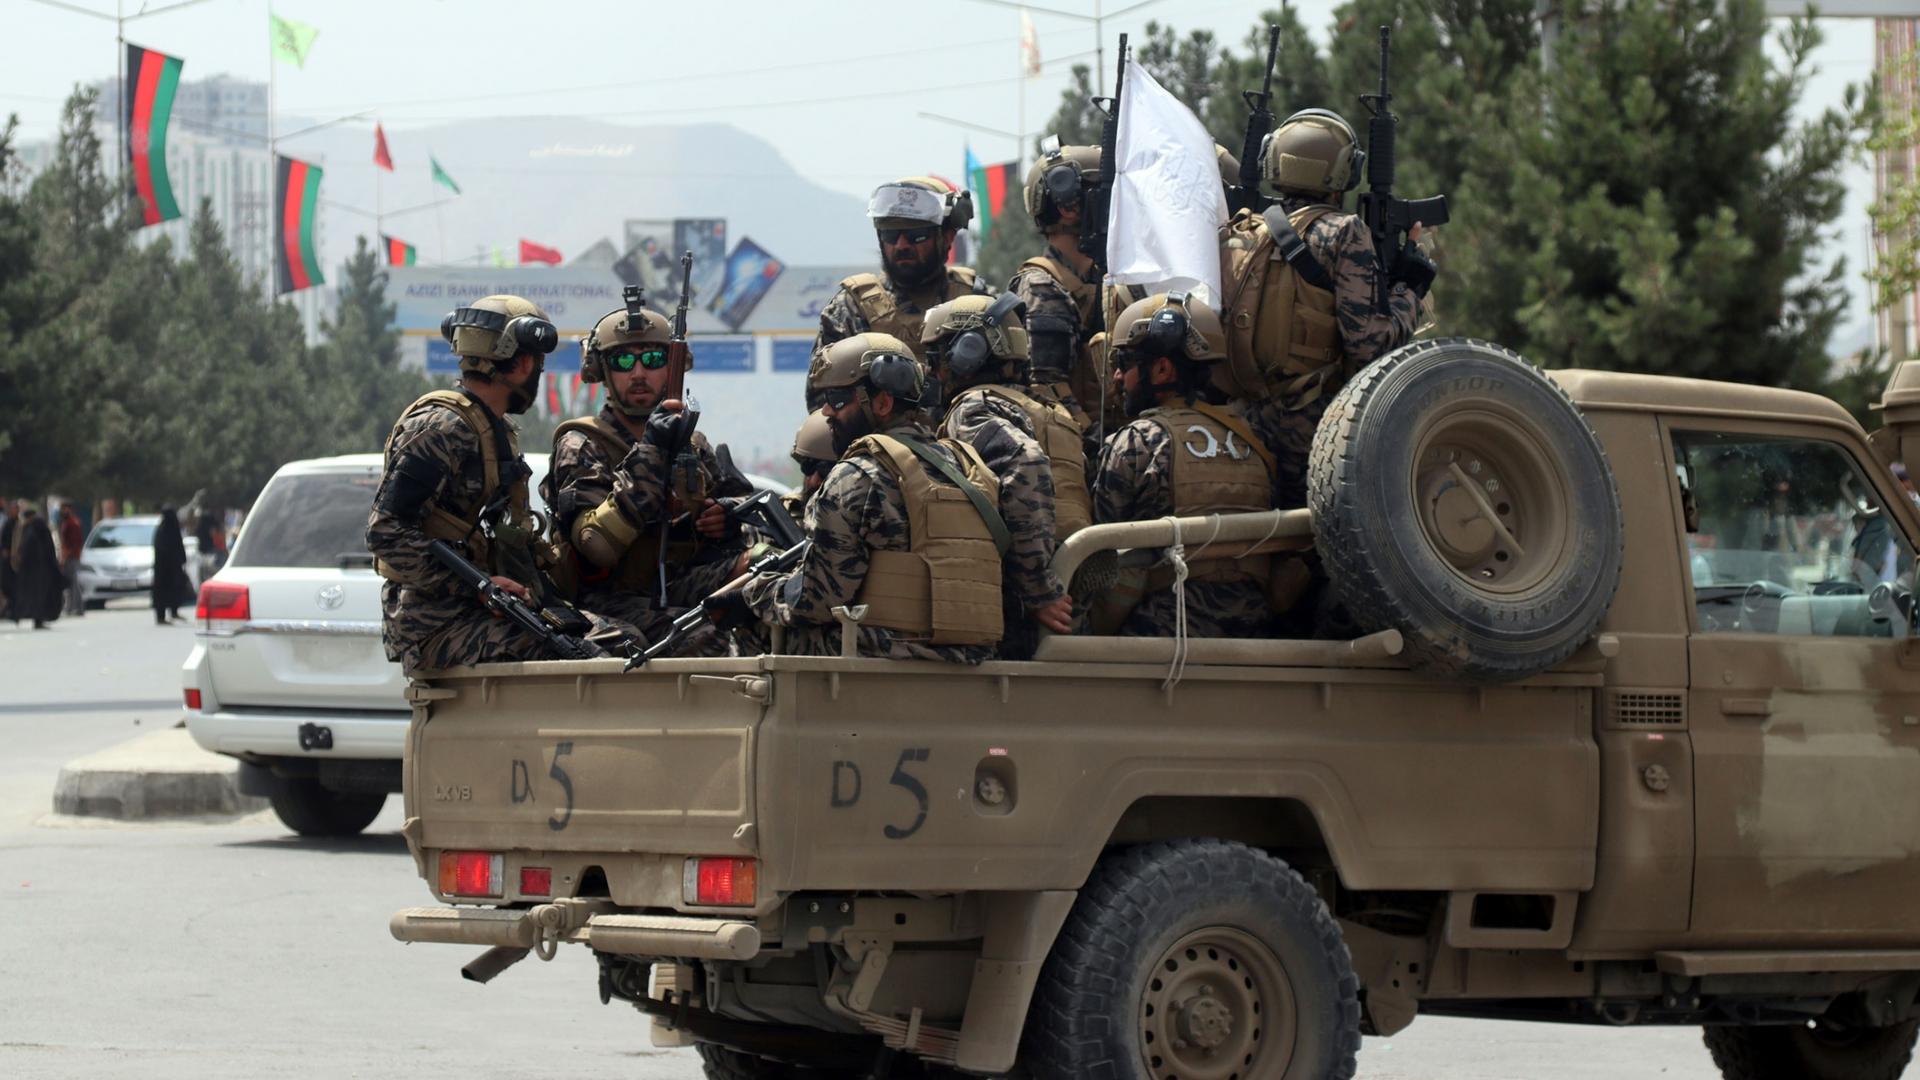 Taliban special force fighters arrive inside the Hamid Karzai International Airport after the US military's withdrawal, in Kabul, Afghanistan, Tuesday, Aug. 31, 2021. 